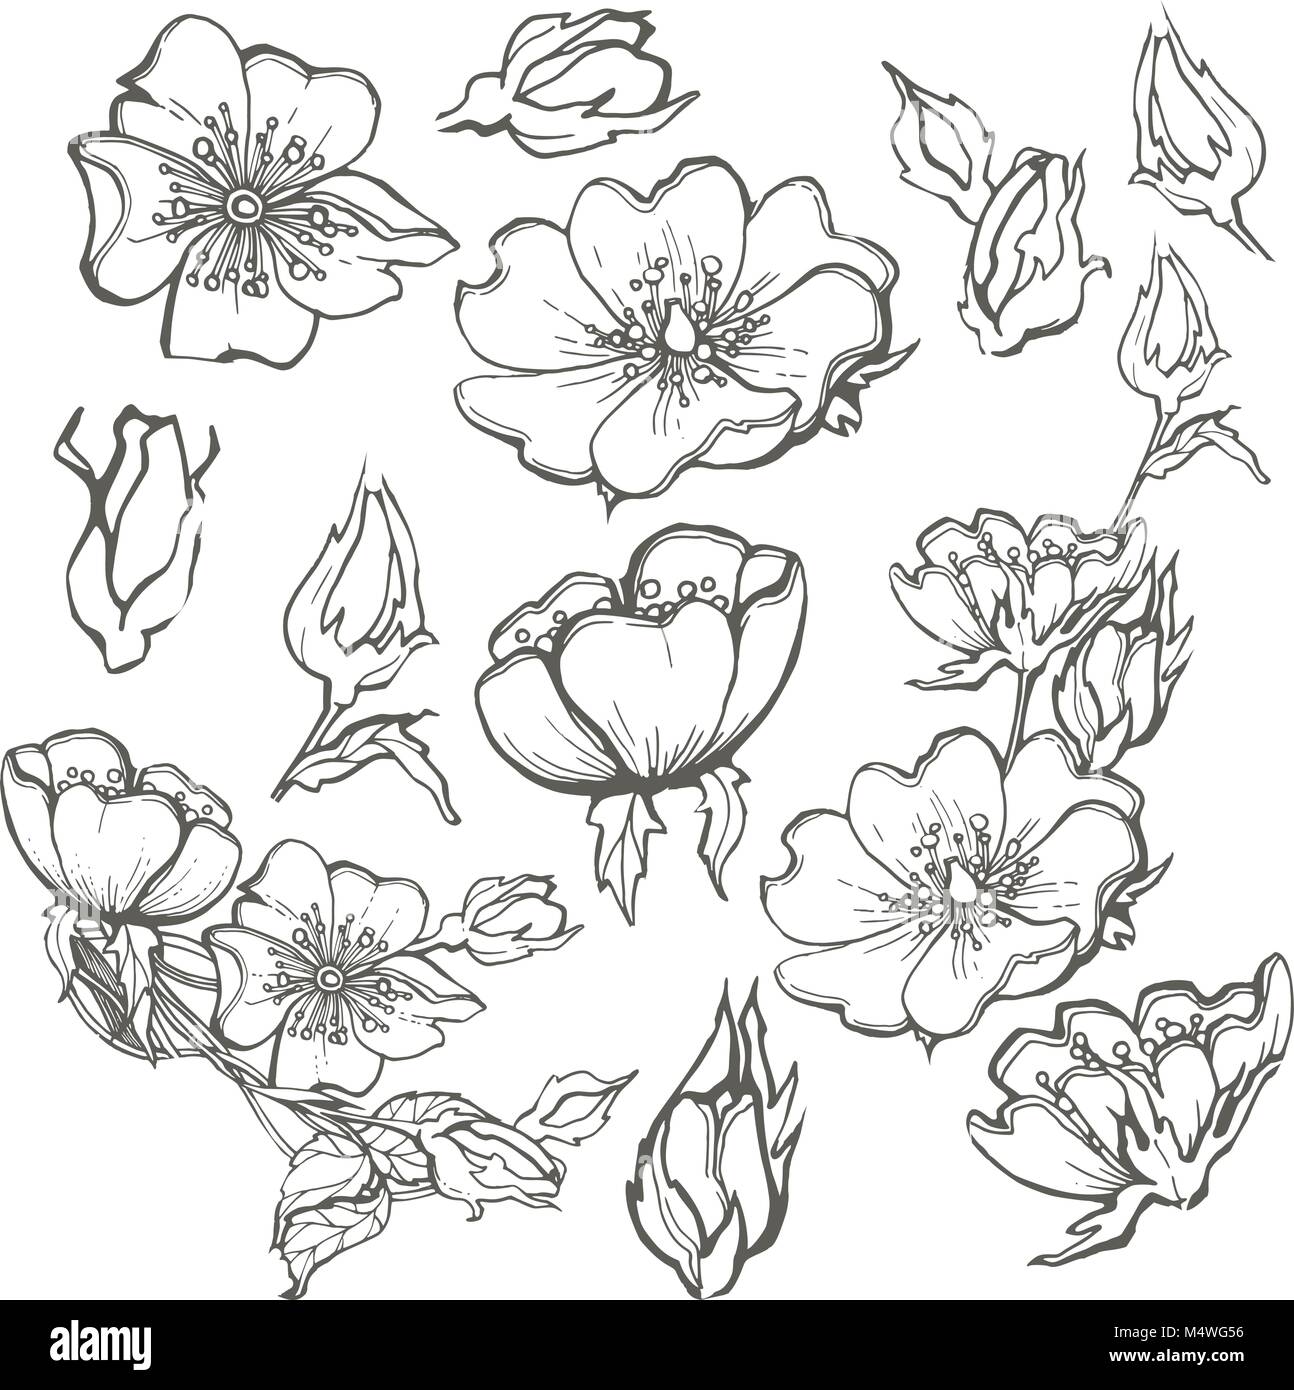 Wild dog rose set flowers contour ink adult coloring page with buds drawing vector clipart on white background for scrapbooking Stock Vector